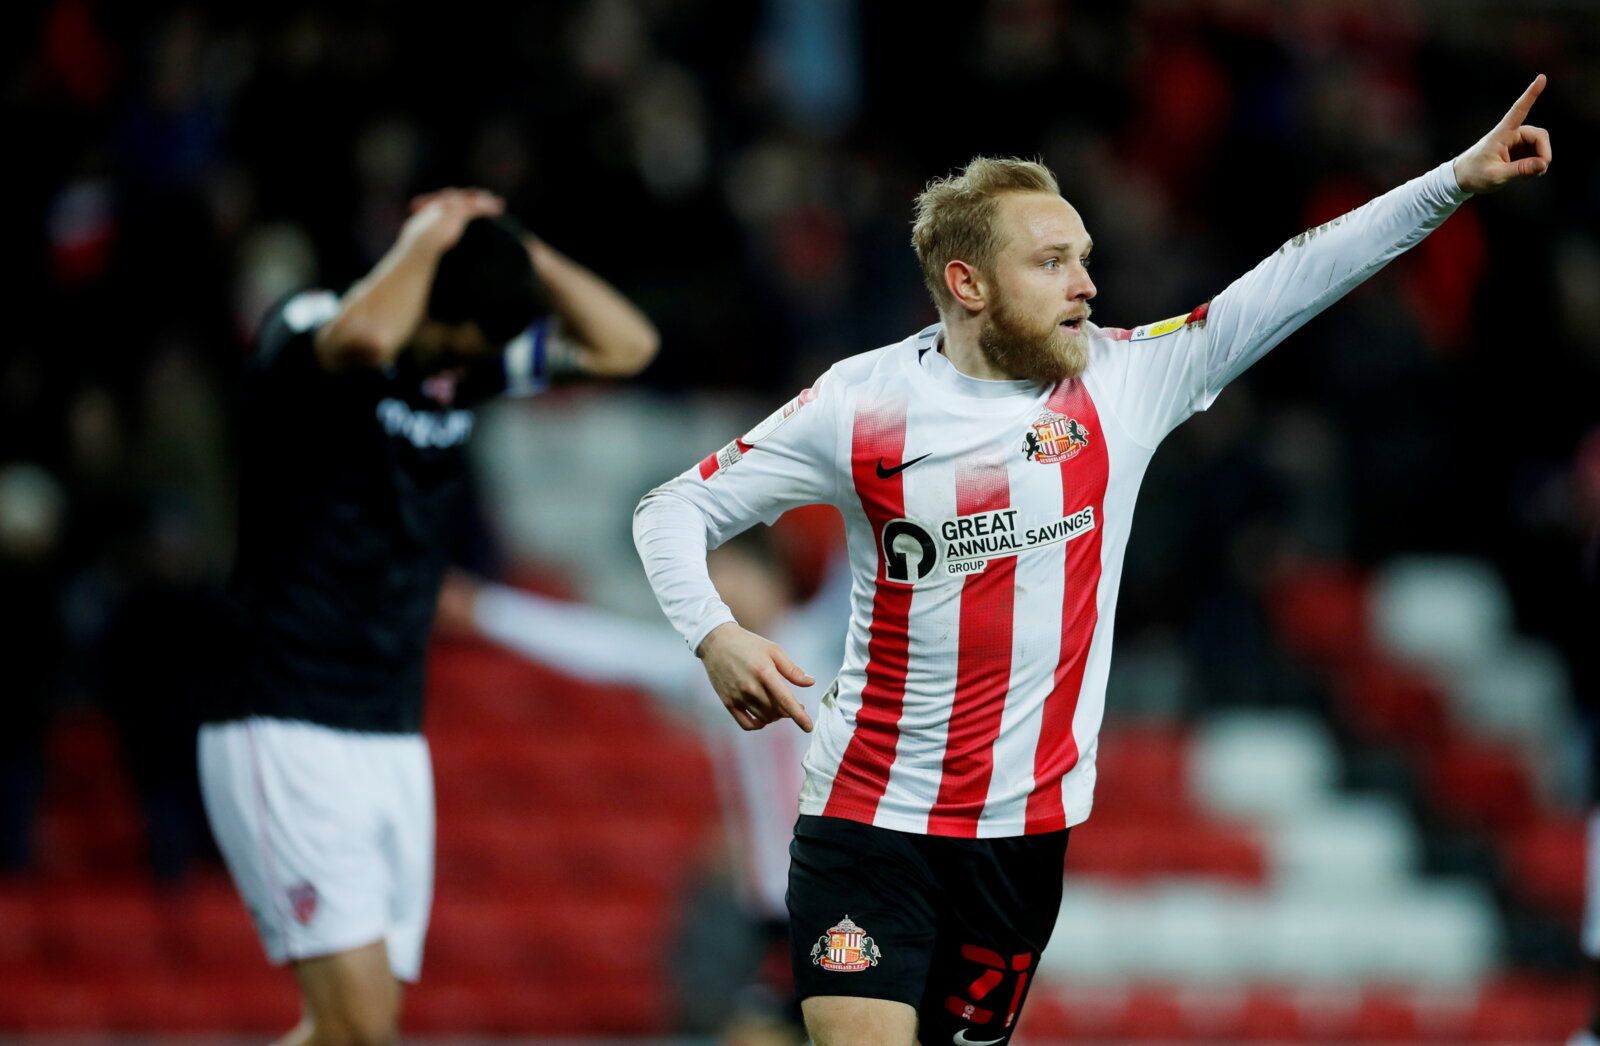 Soccer Football - League One - Sunderland v Morecambe - Stadium of Light, Sunderland, Britain - December 7, 2021  Sunderland?s Alex Pritchard celebrates scoring their third goal   Action Images/Lee Smith  EDITORIAL USE ONLY. No use with unauthorized audio, video, data, fixture lists, club/league logos or 